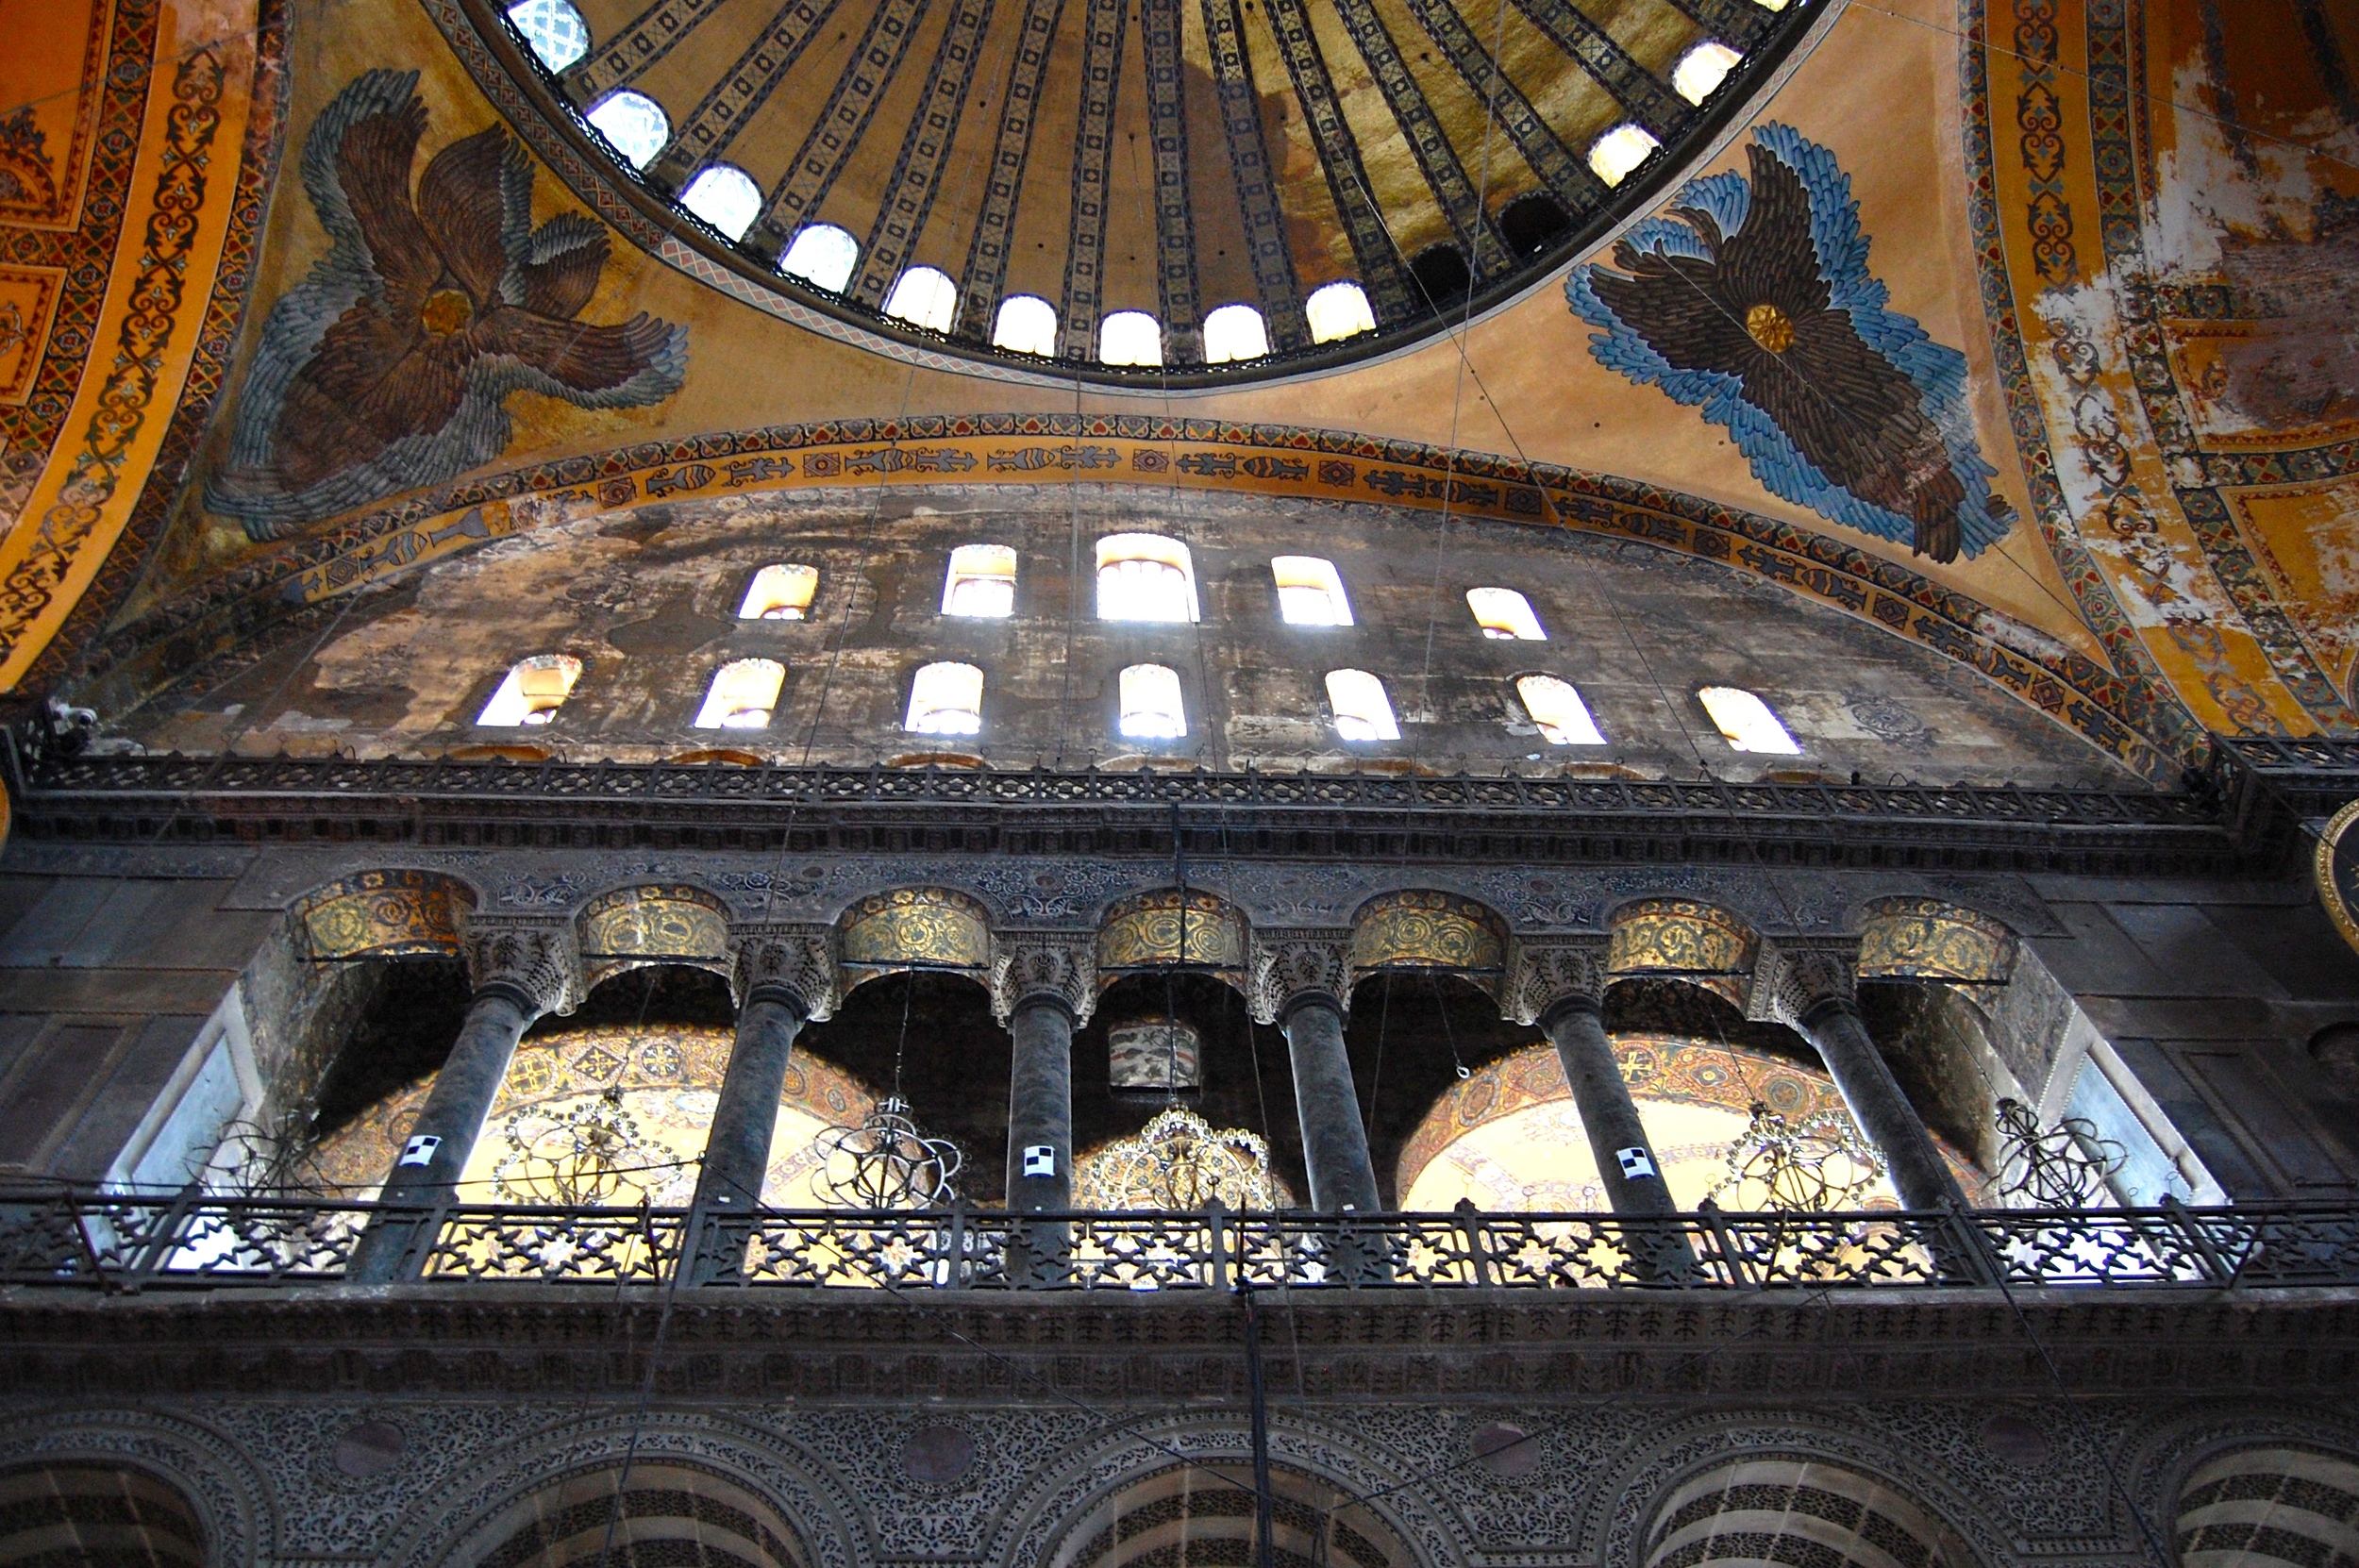 Balcony and Dome Detail